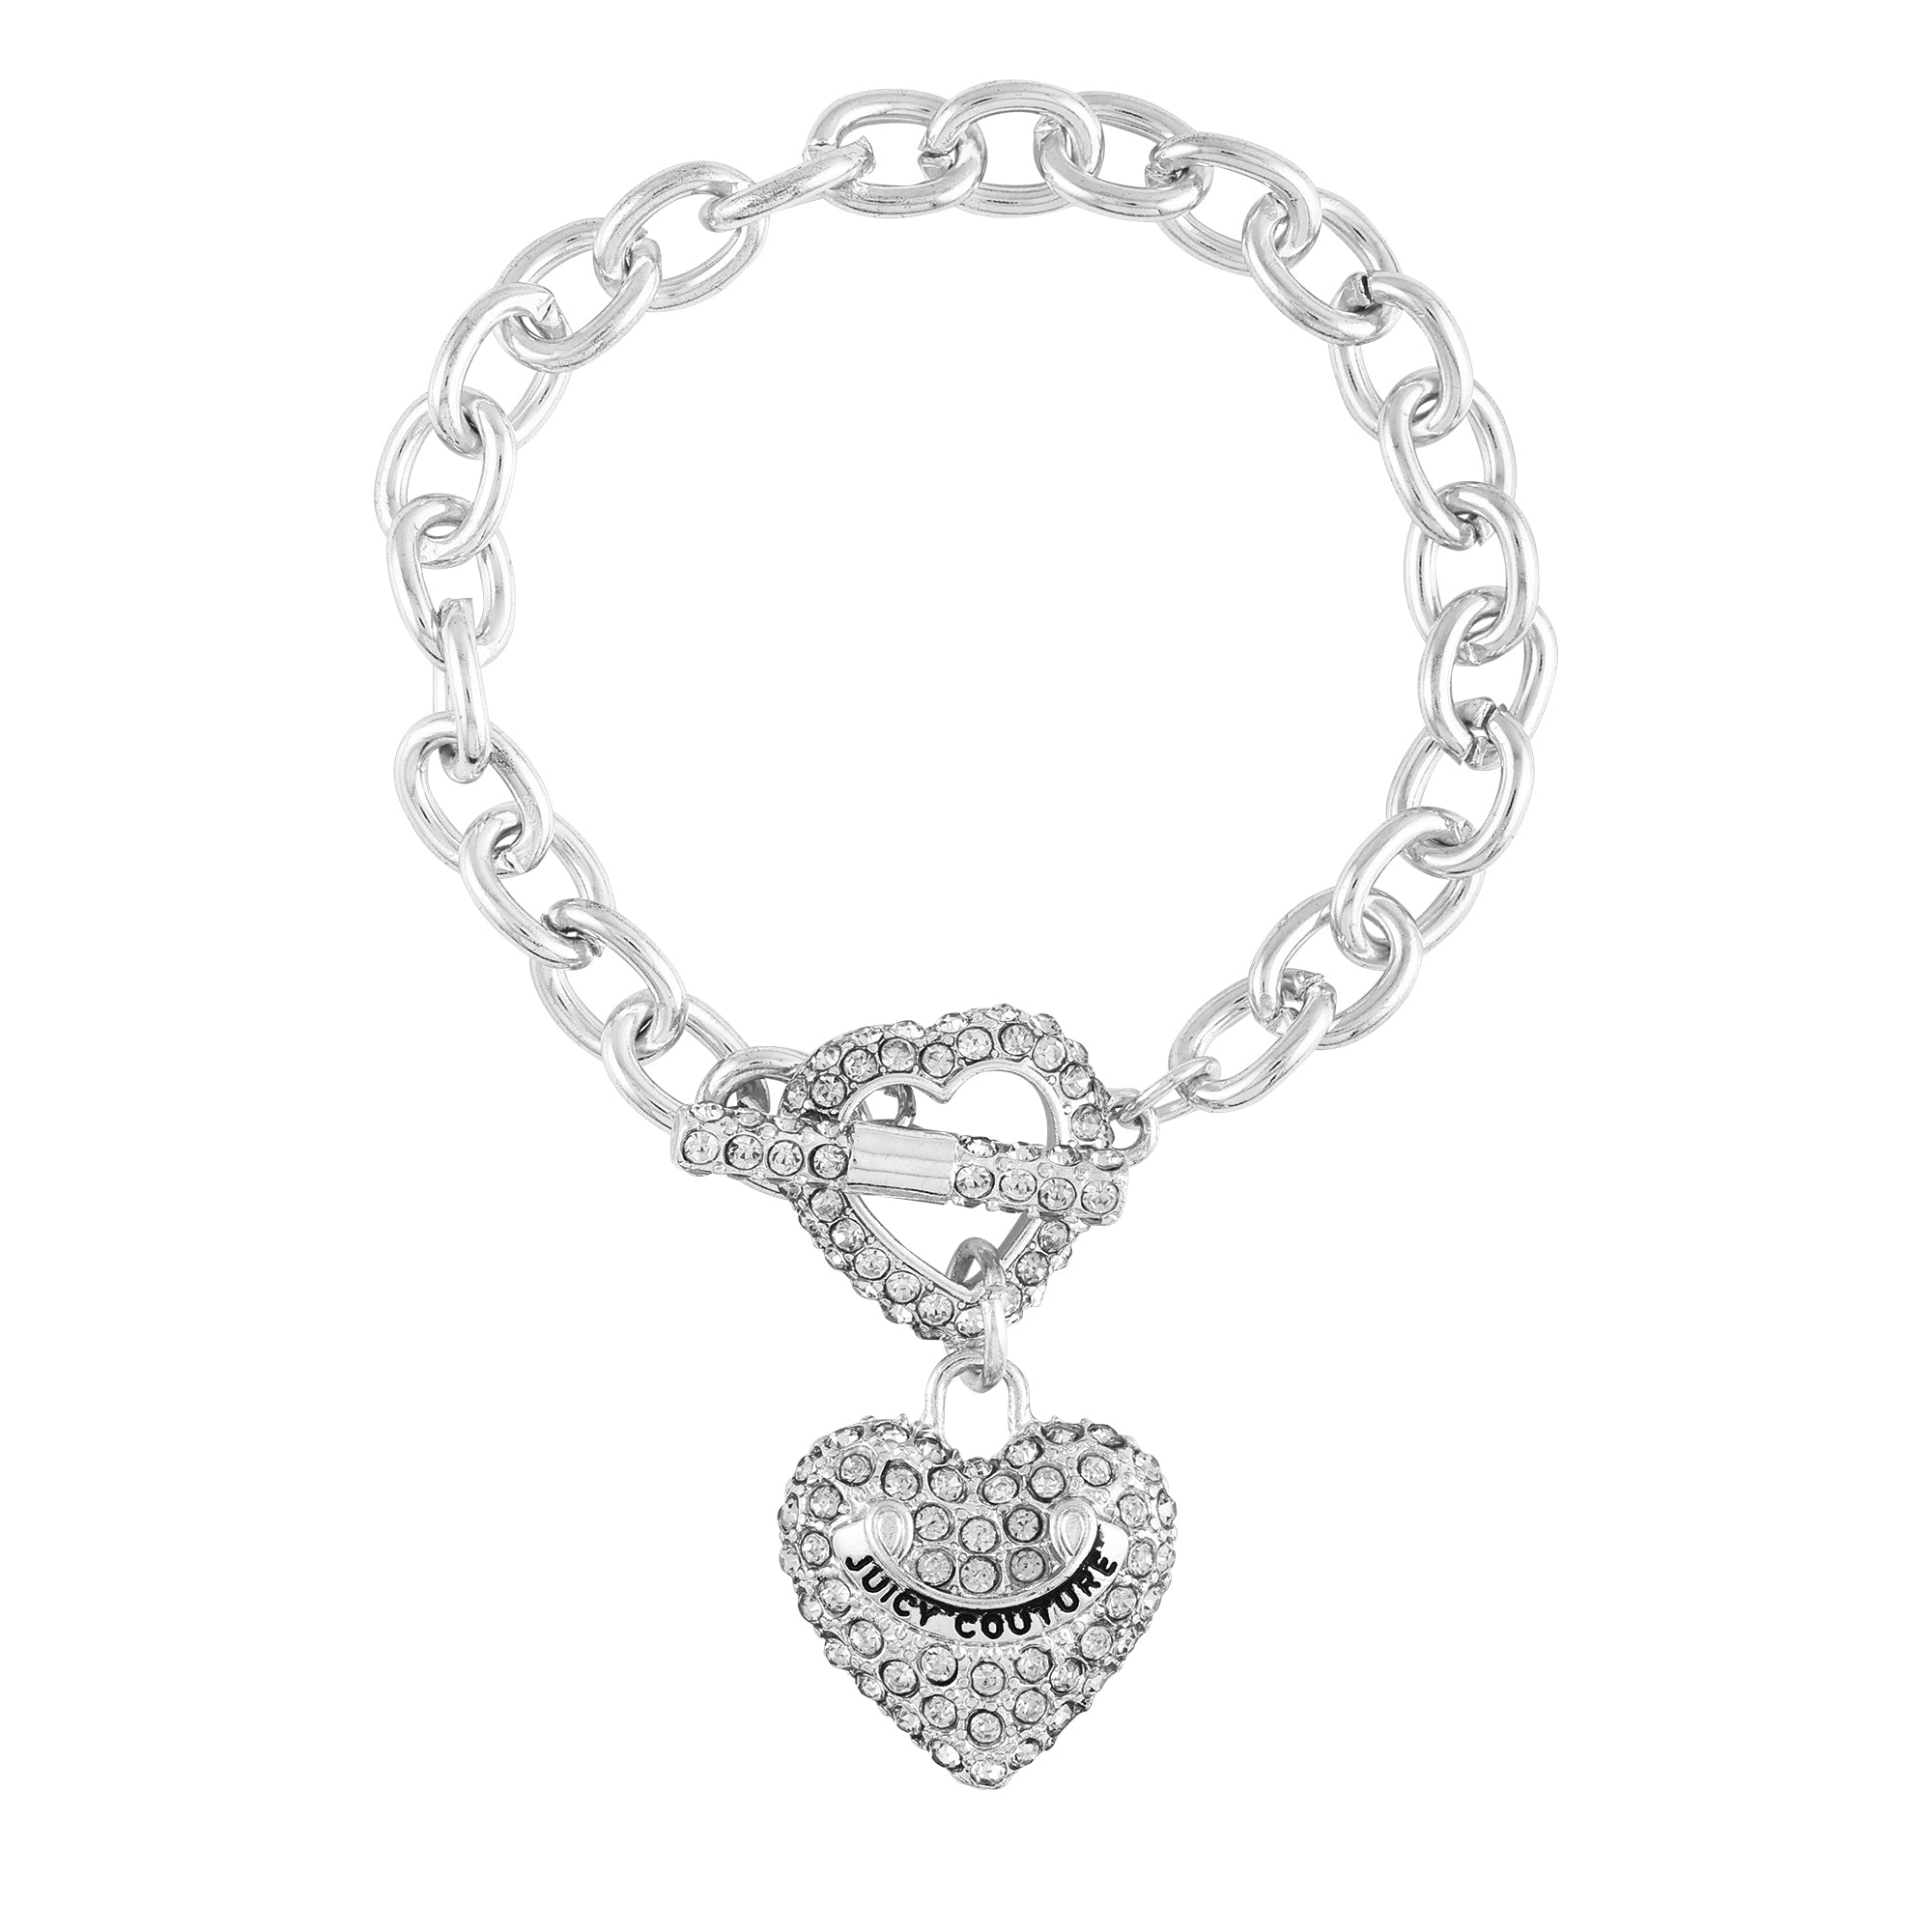 Juicy Couture Silver Tone Bracelet With Unusual Heart Clasp